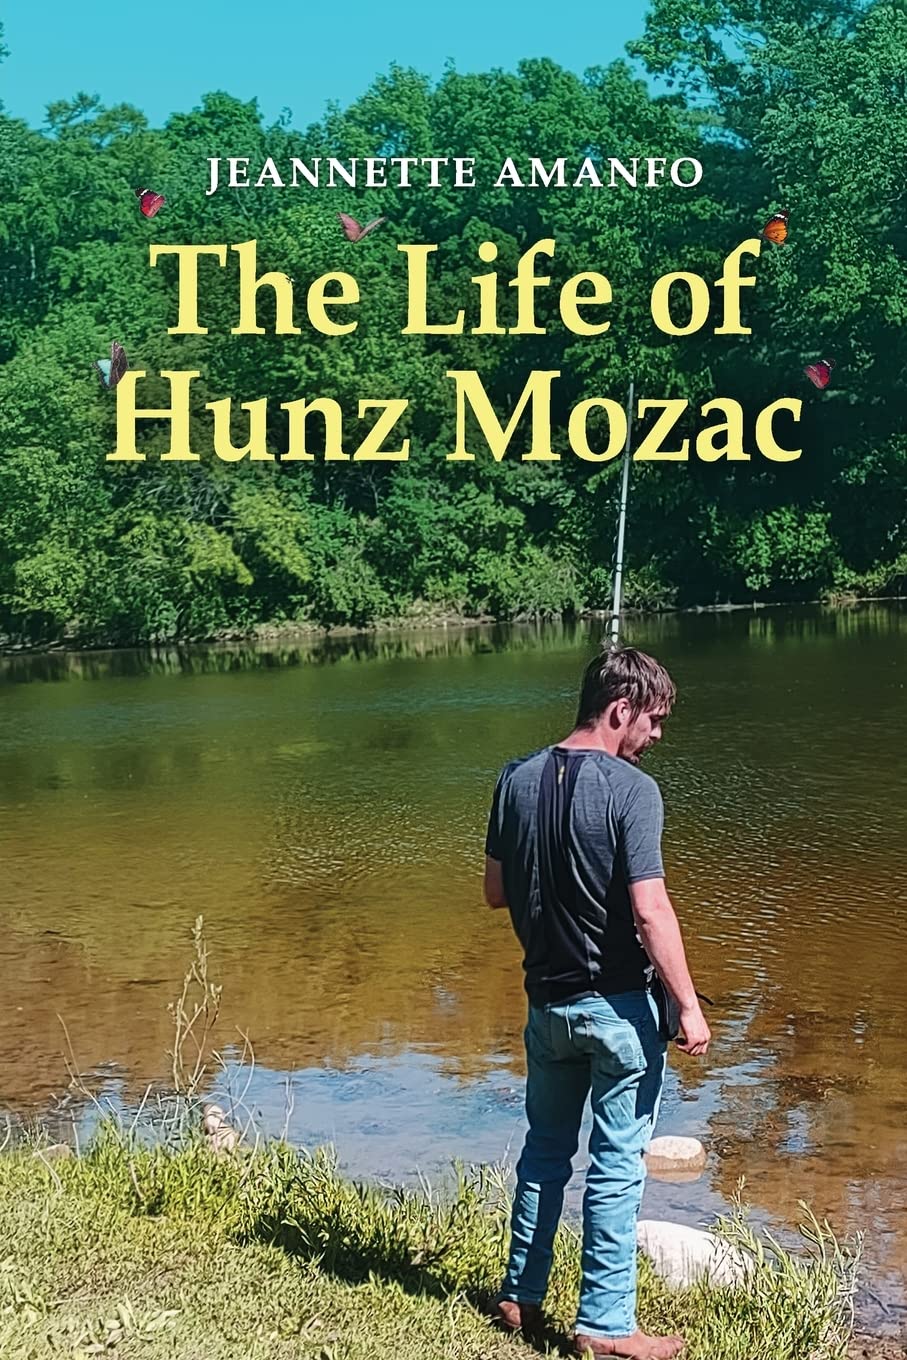 Author's Tranquility Press Publishes The Life of Hunz Mozac by Jeannette Amanfo